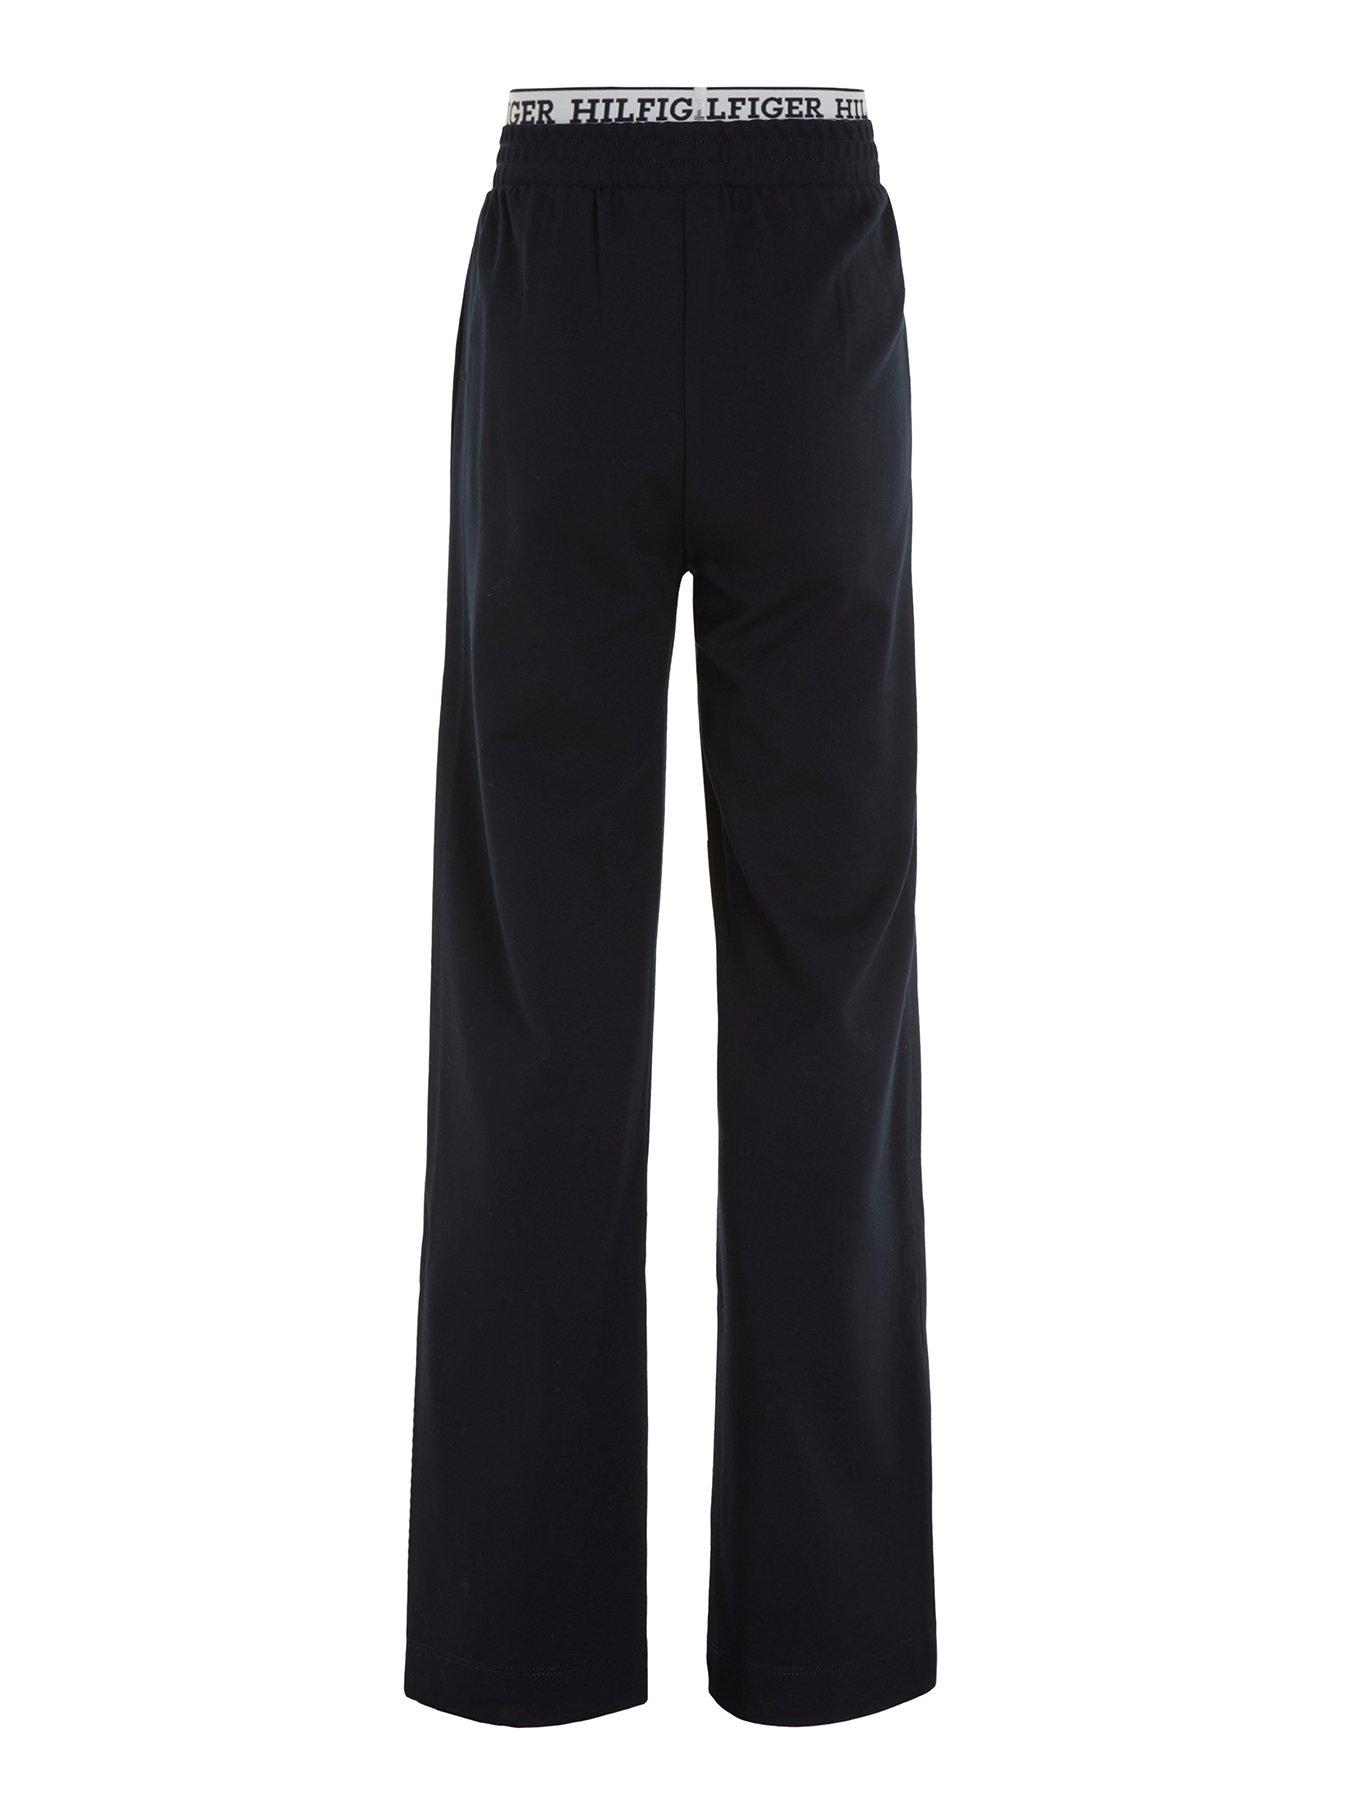 Tommy Hilfiger Girls Monotype Tape Wide Leg Sweatpant - Navy, Navy, Size Age: 8 Years, Women